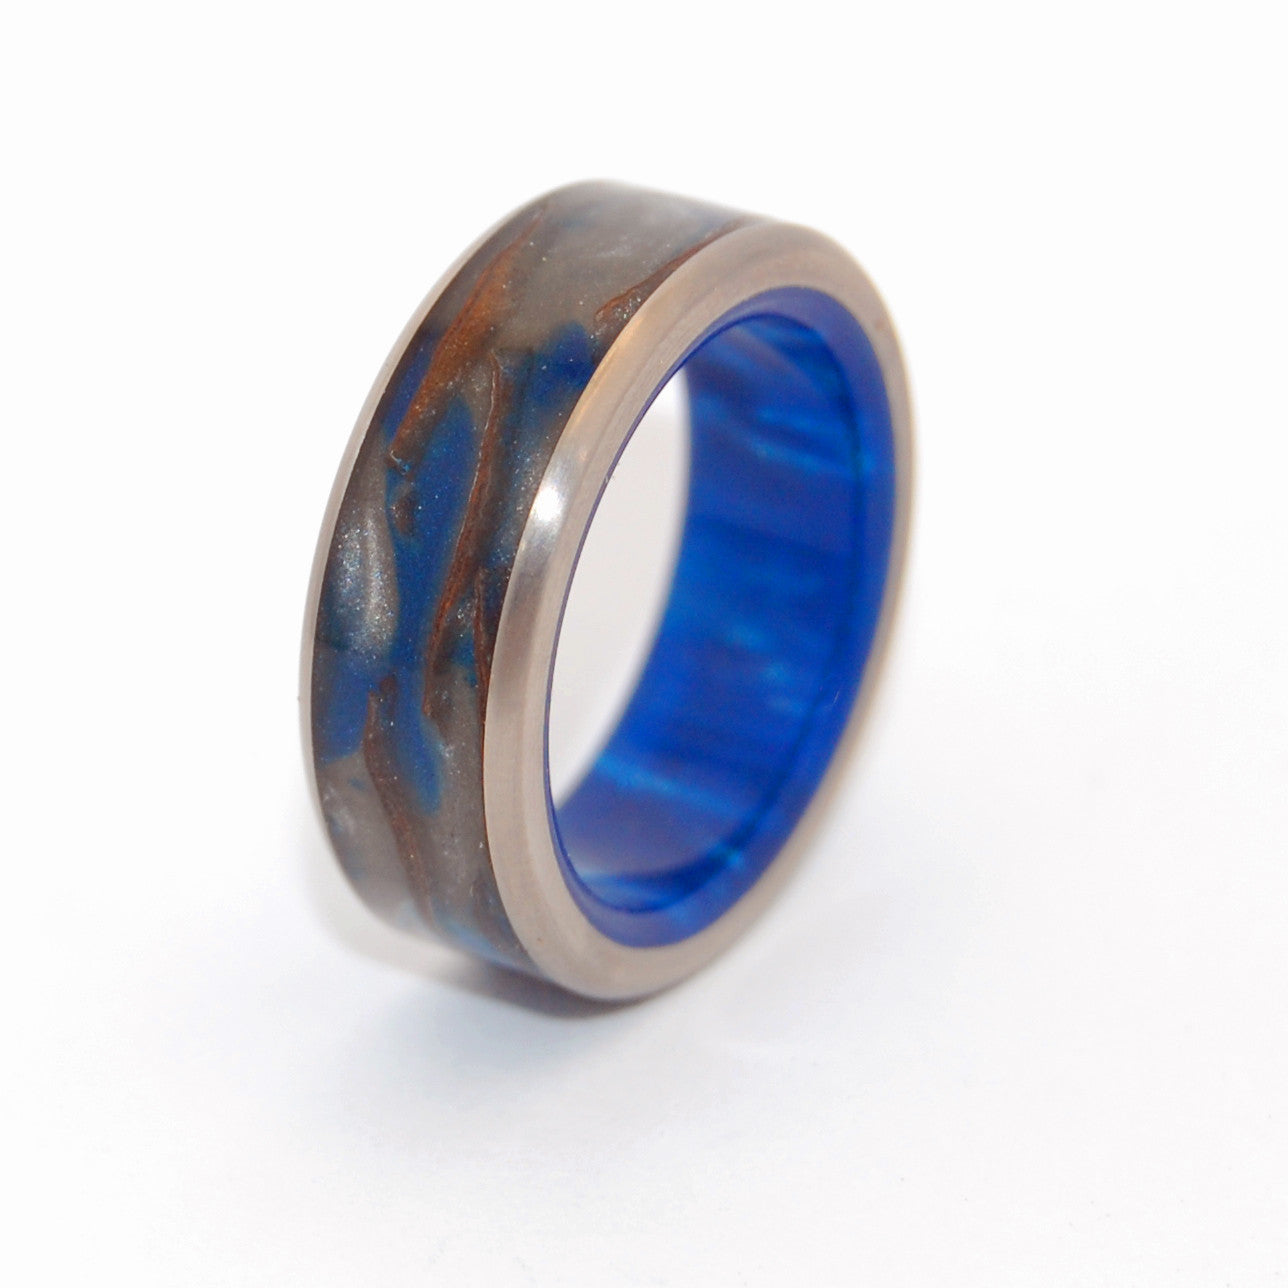 GALACTIC LOVE | Pine Cone & Blue Resin - Handcrafted Titanium Wedding Rings - Minter and Richter Designs